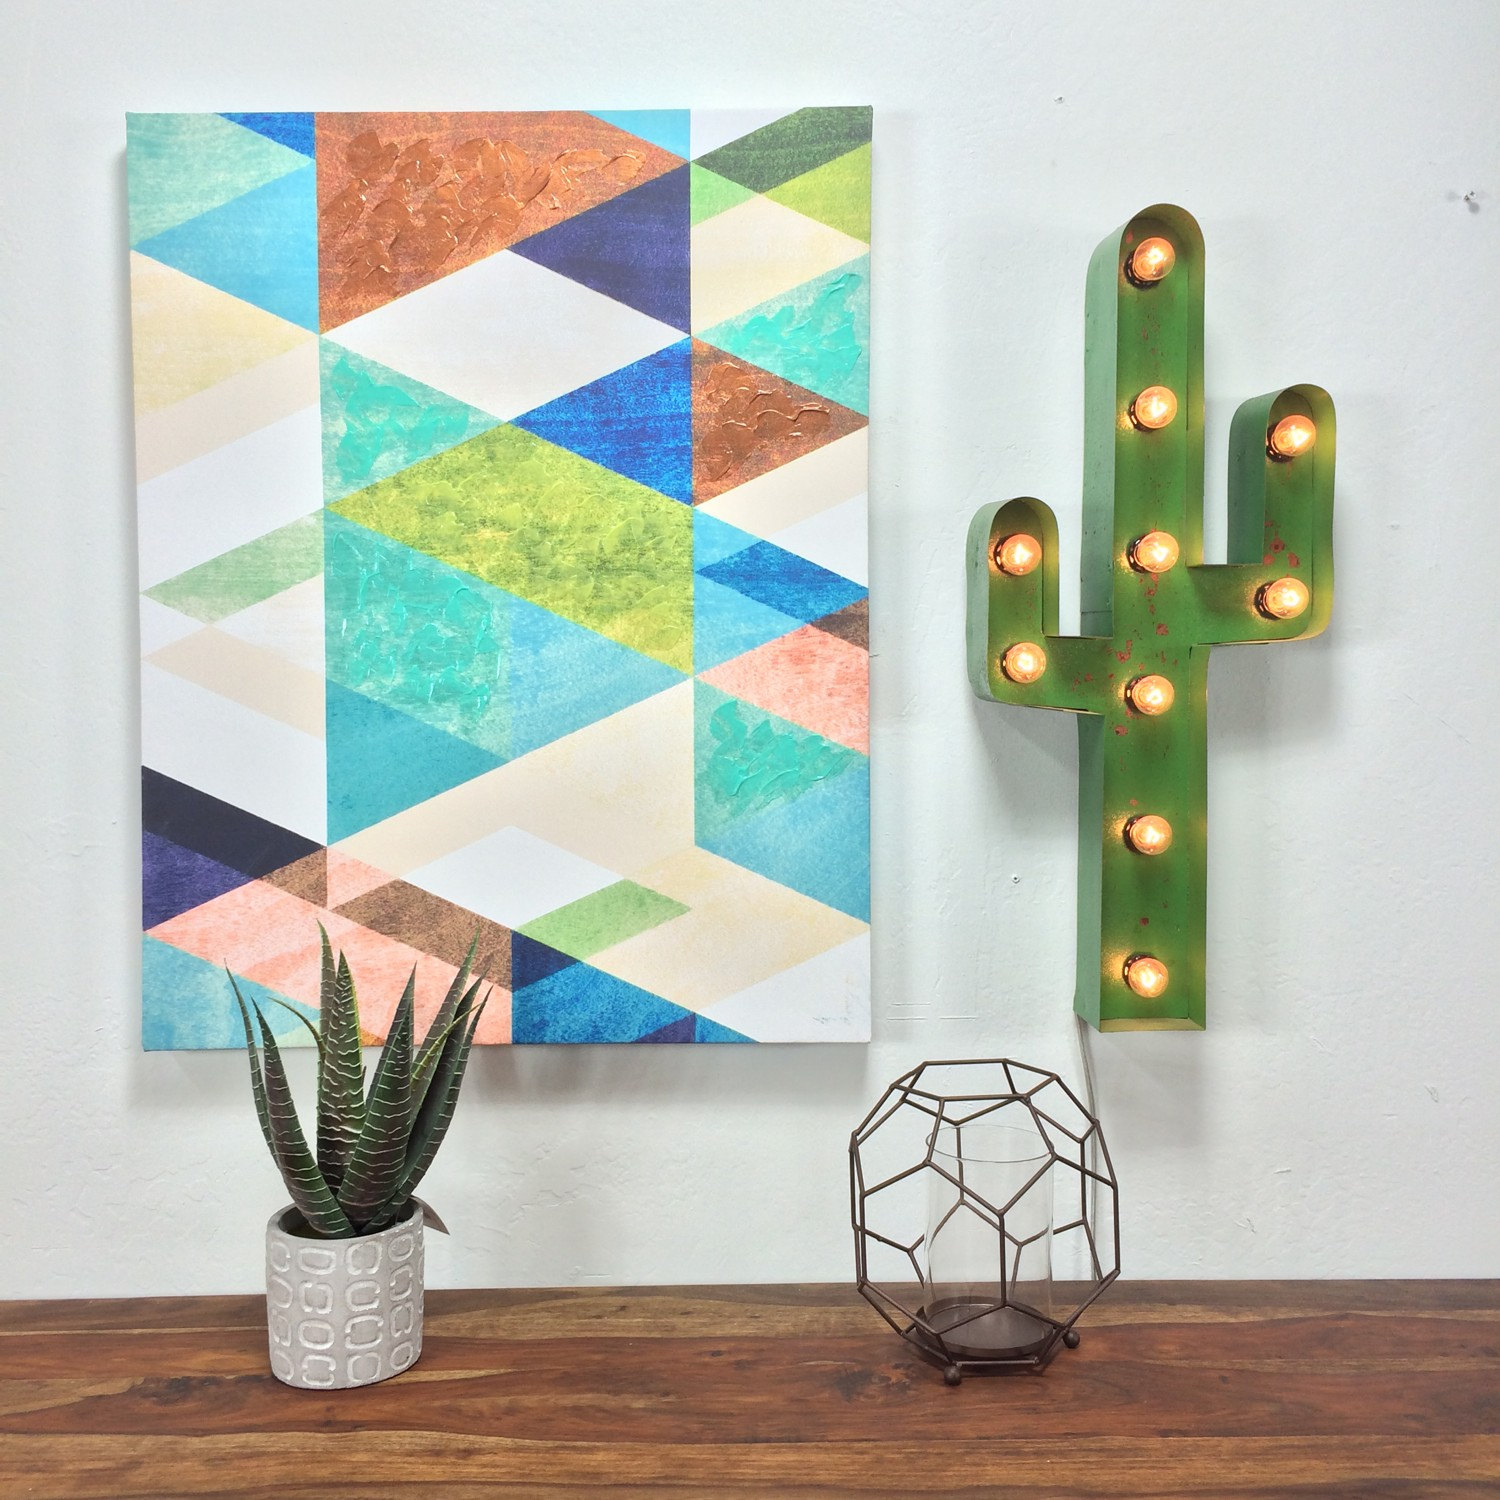 Marquee Cactus from Etsy